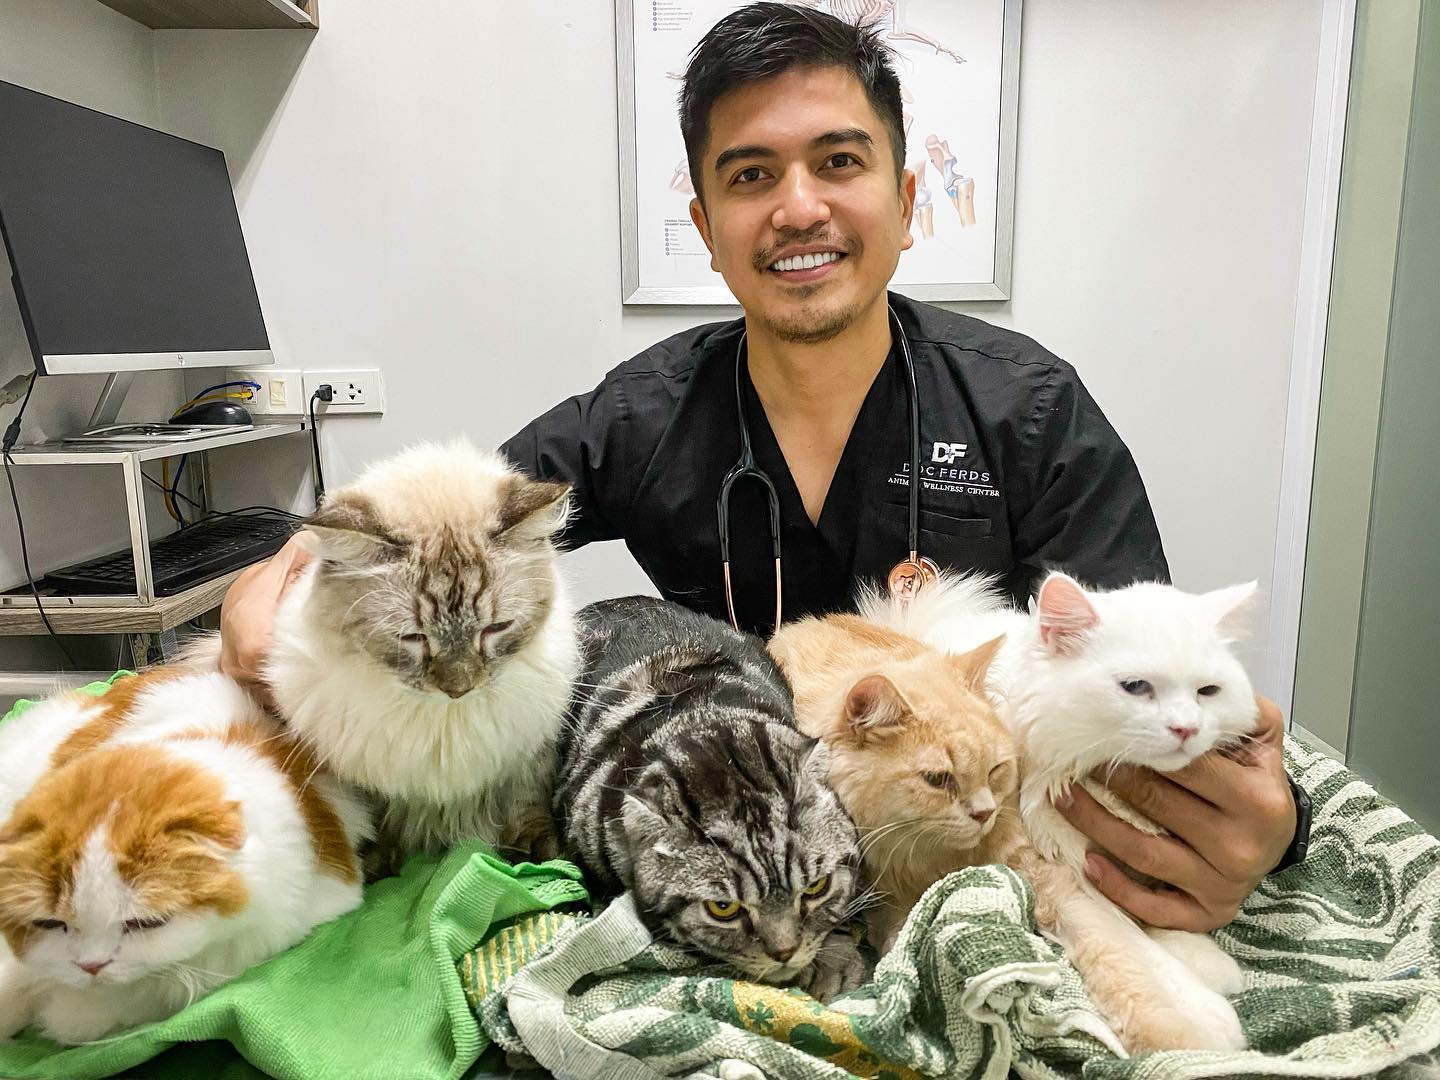 Doc Ferds with cats